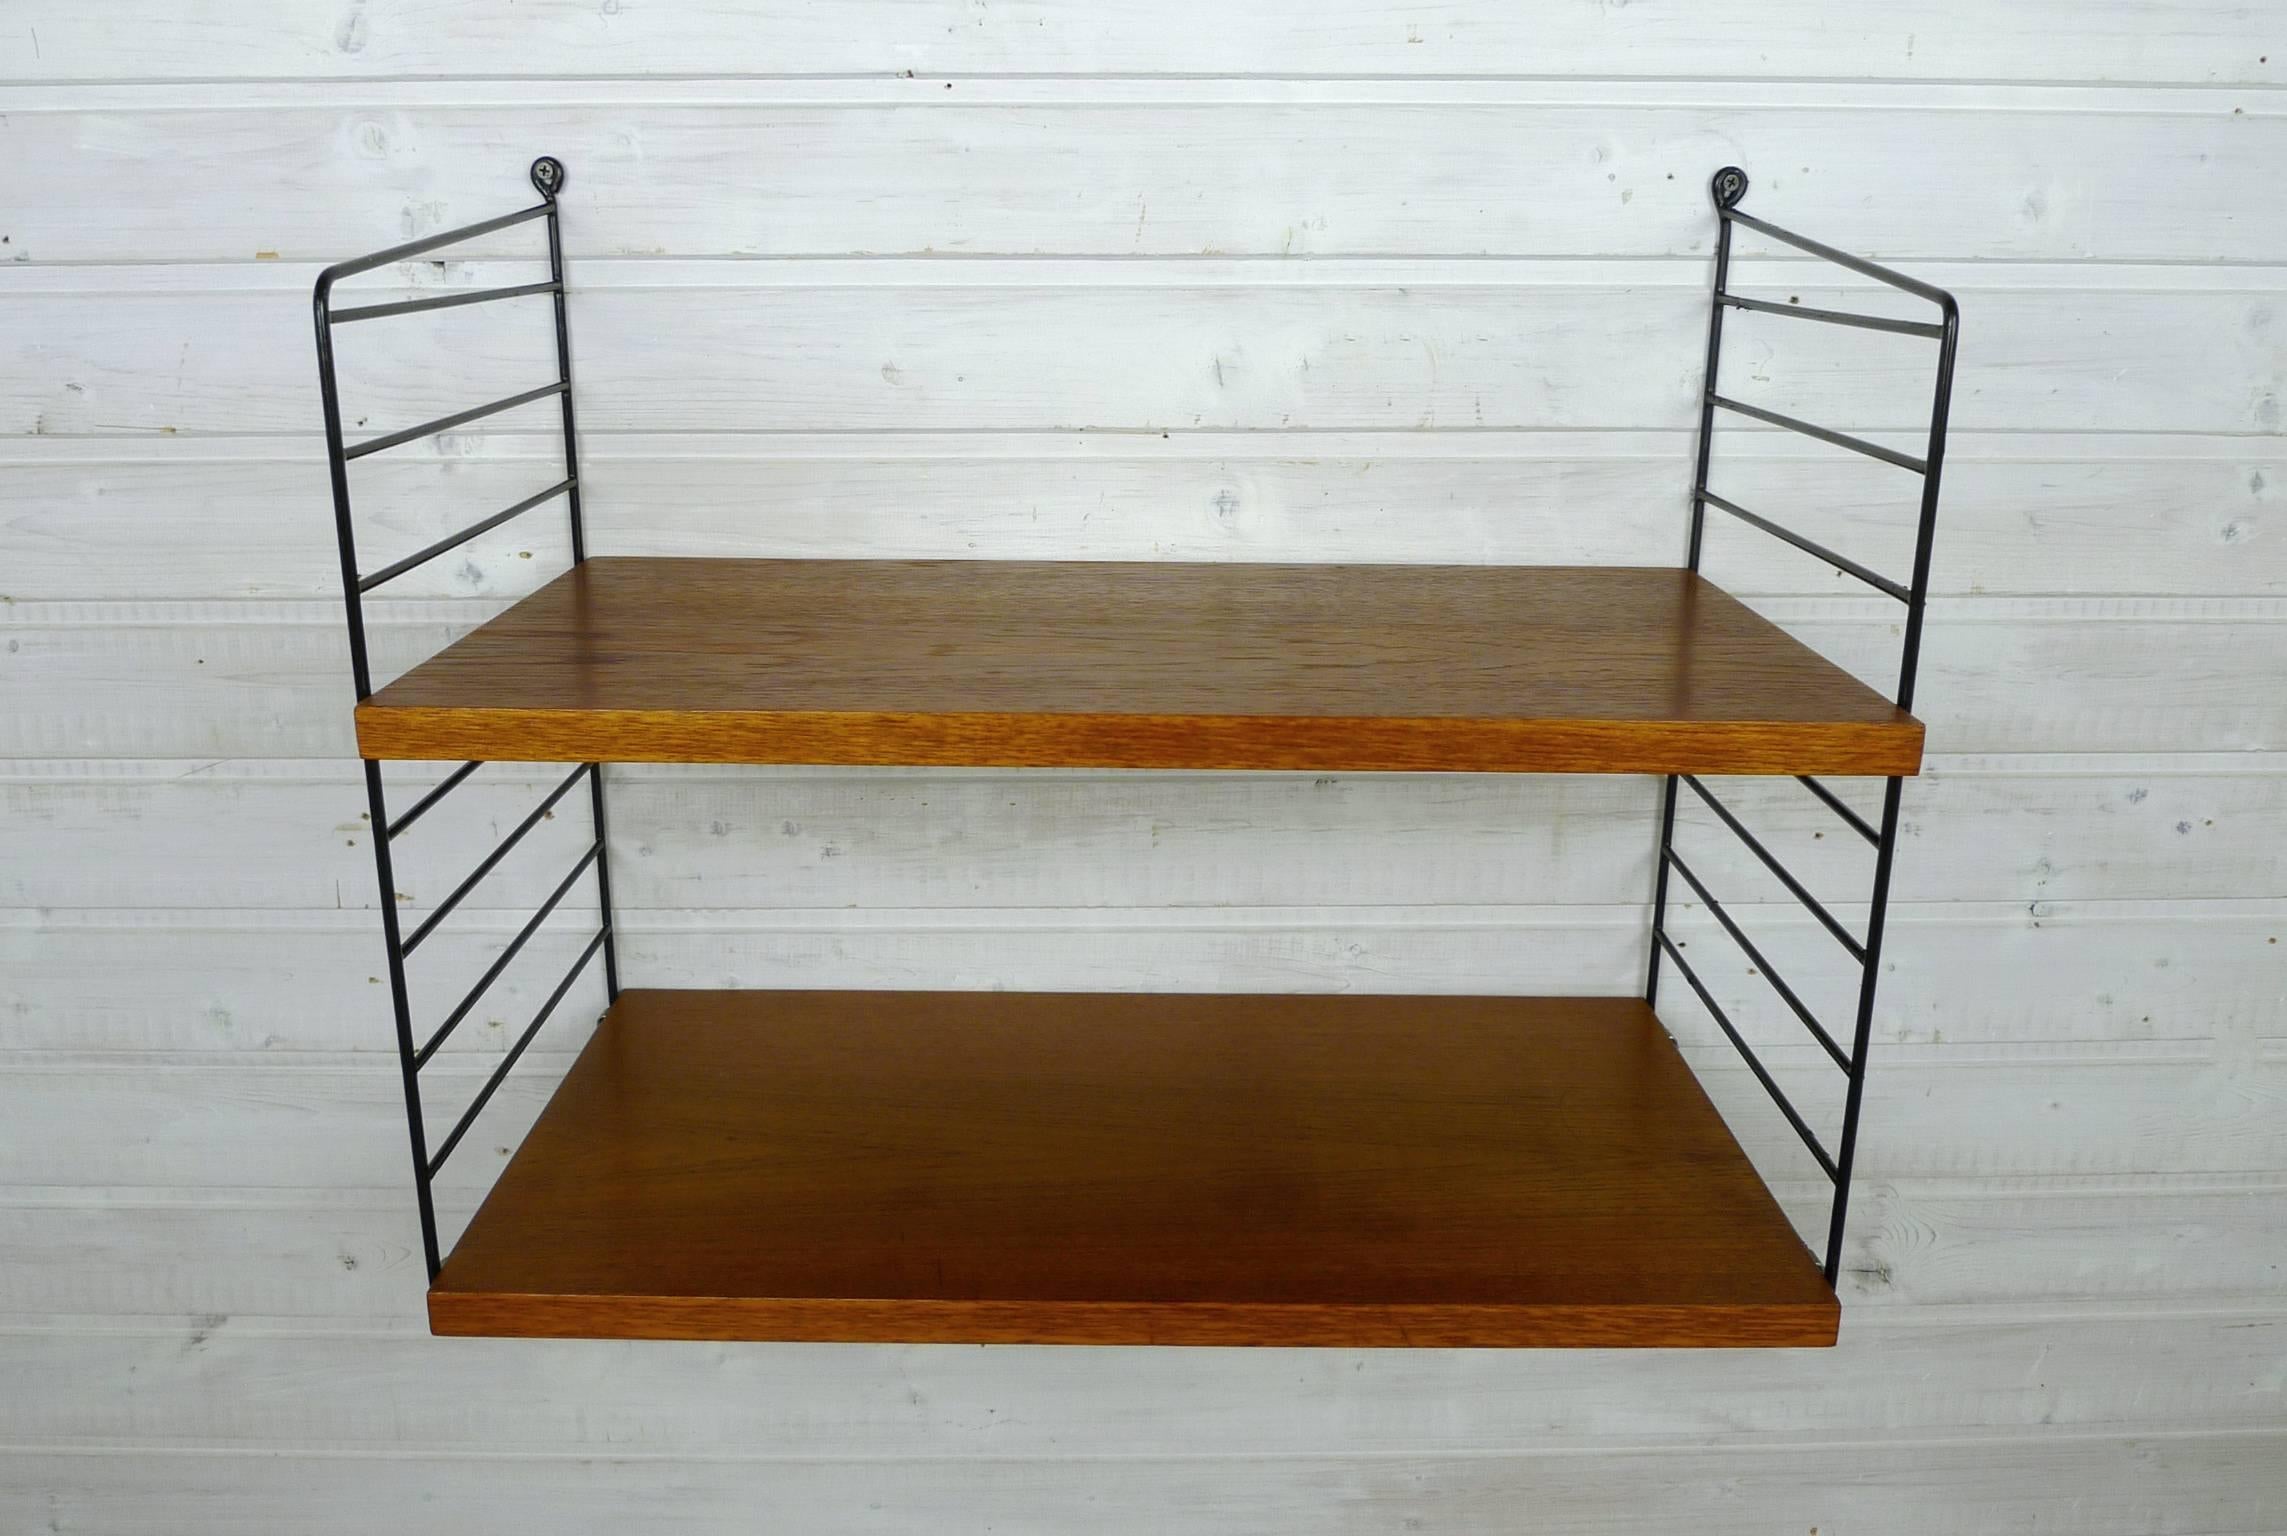 Nisse Strinning designed his famous shelf system in 1949. It was produced in his own company String Design AB in Sweden.
This wall shelf consists of two black-coated ladders and two shelves in teak with a depth of 30 cm. The shelf is in a good